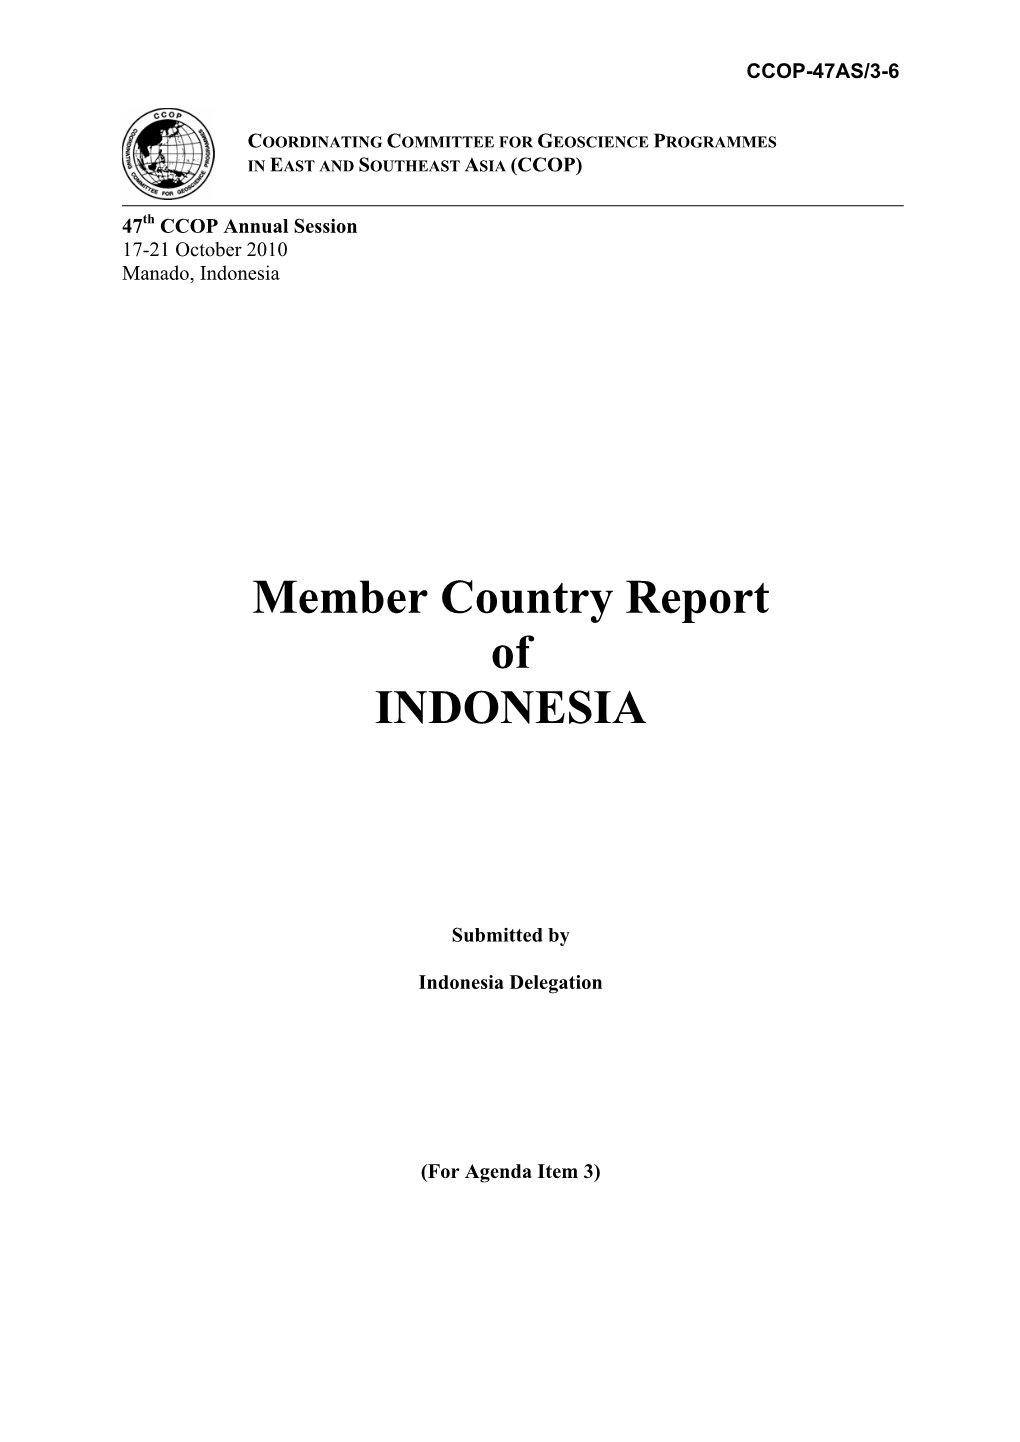 Member Country Report of INDONESIA